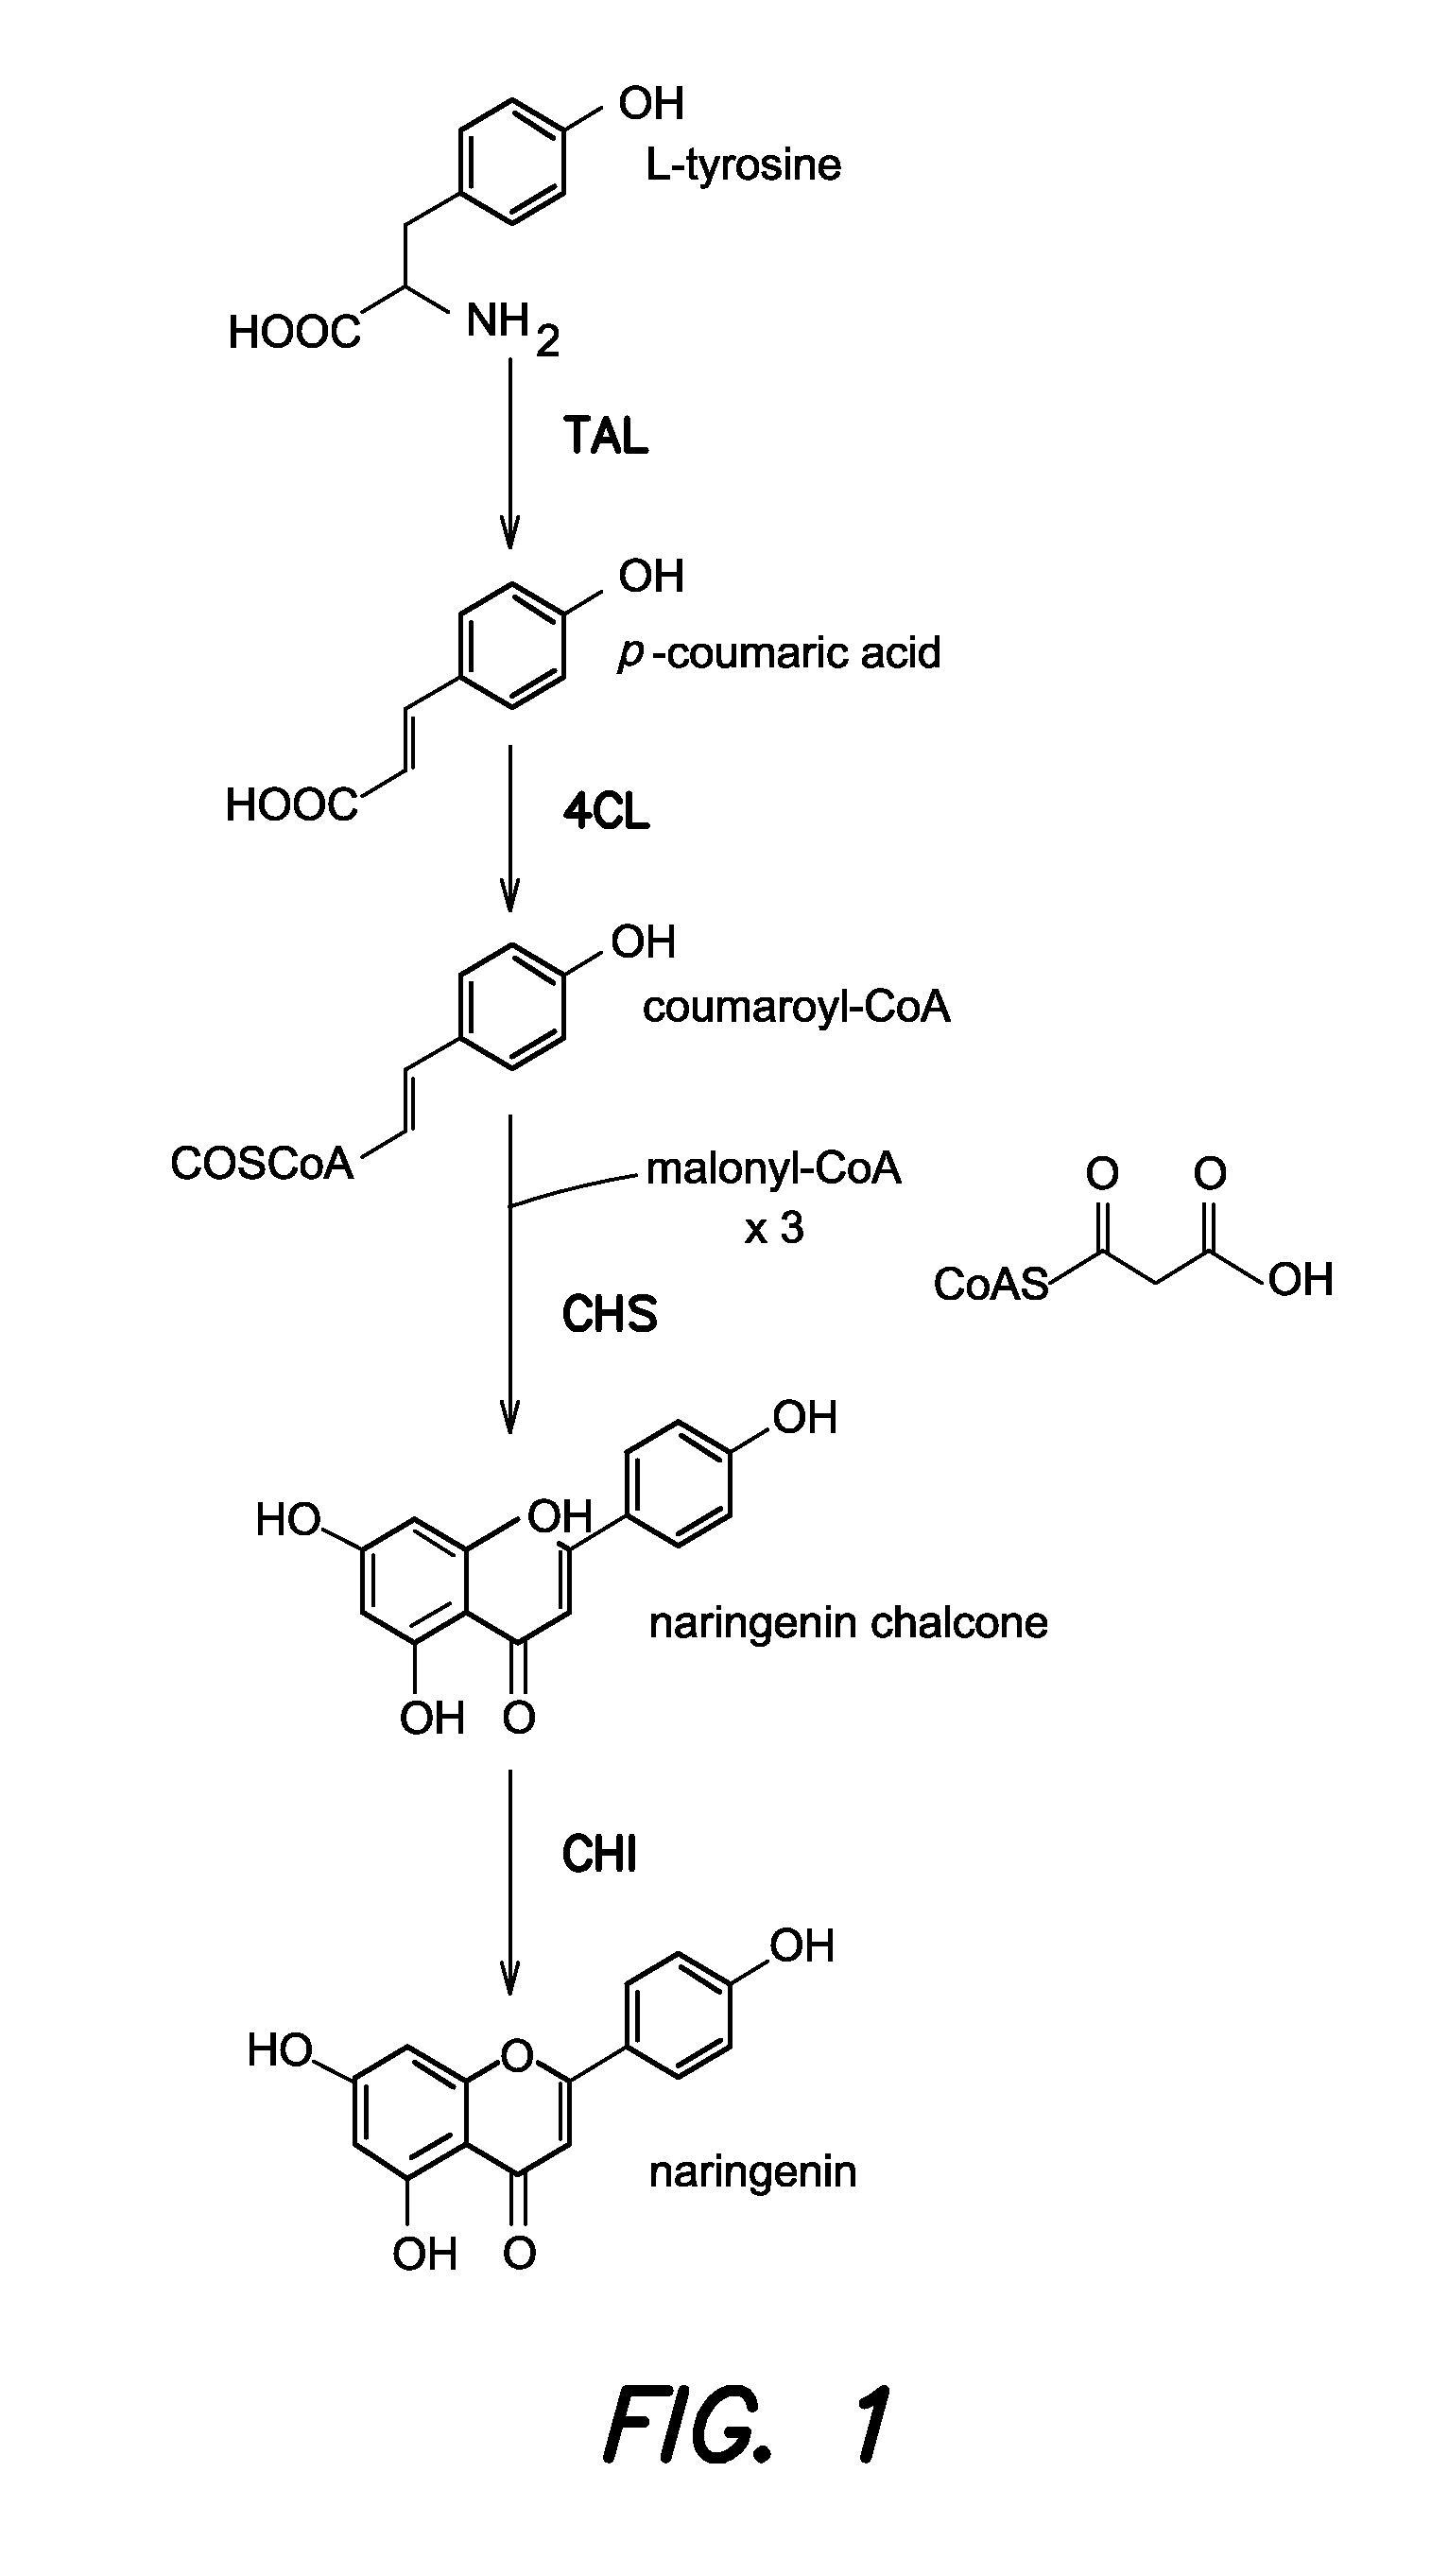 Strains for the production of flavonoids from glucose